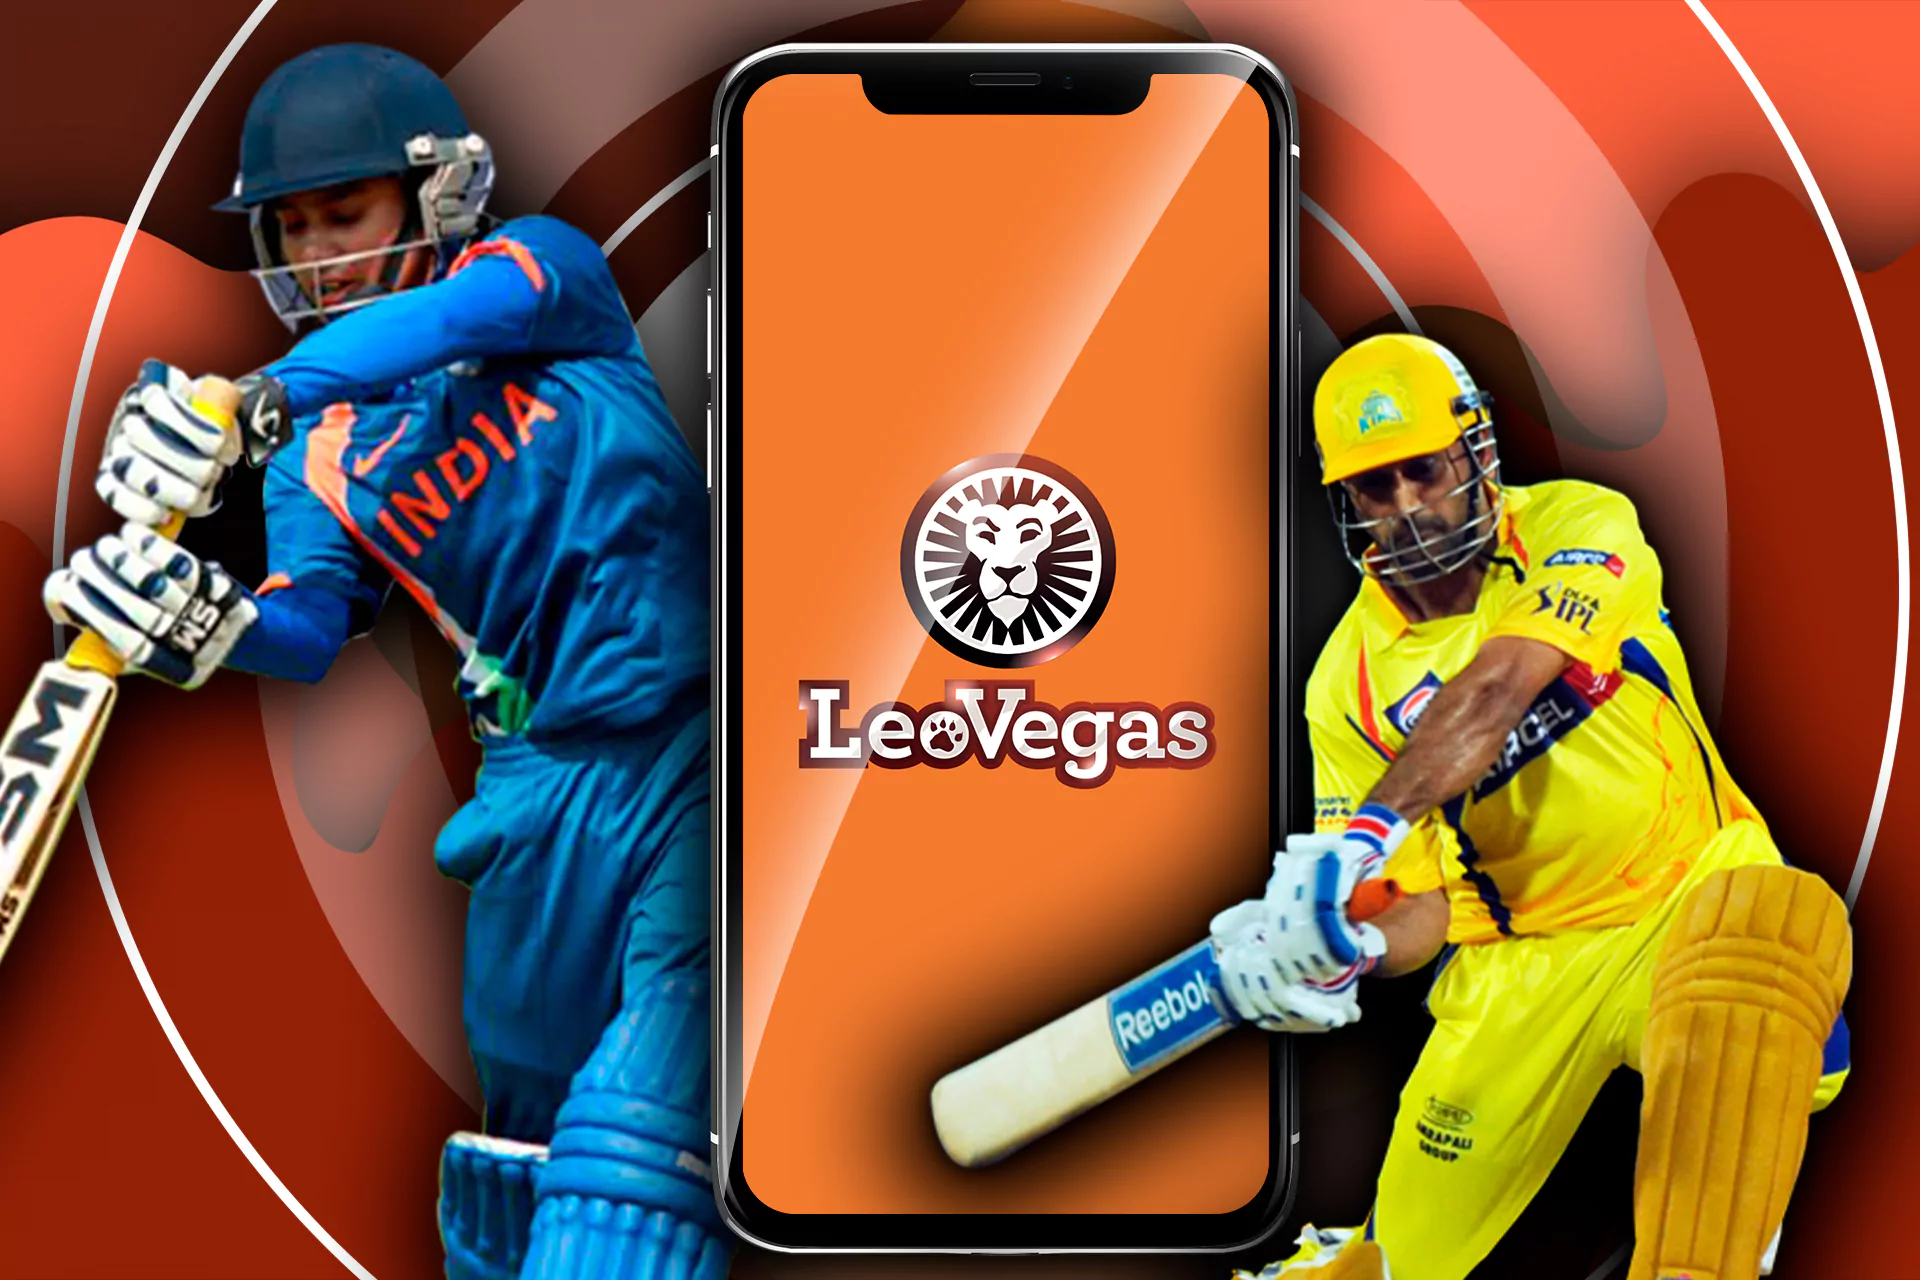 Top up your LeoVegas account and place your first bet on cricket.